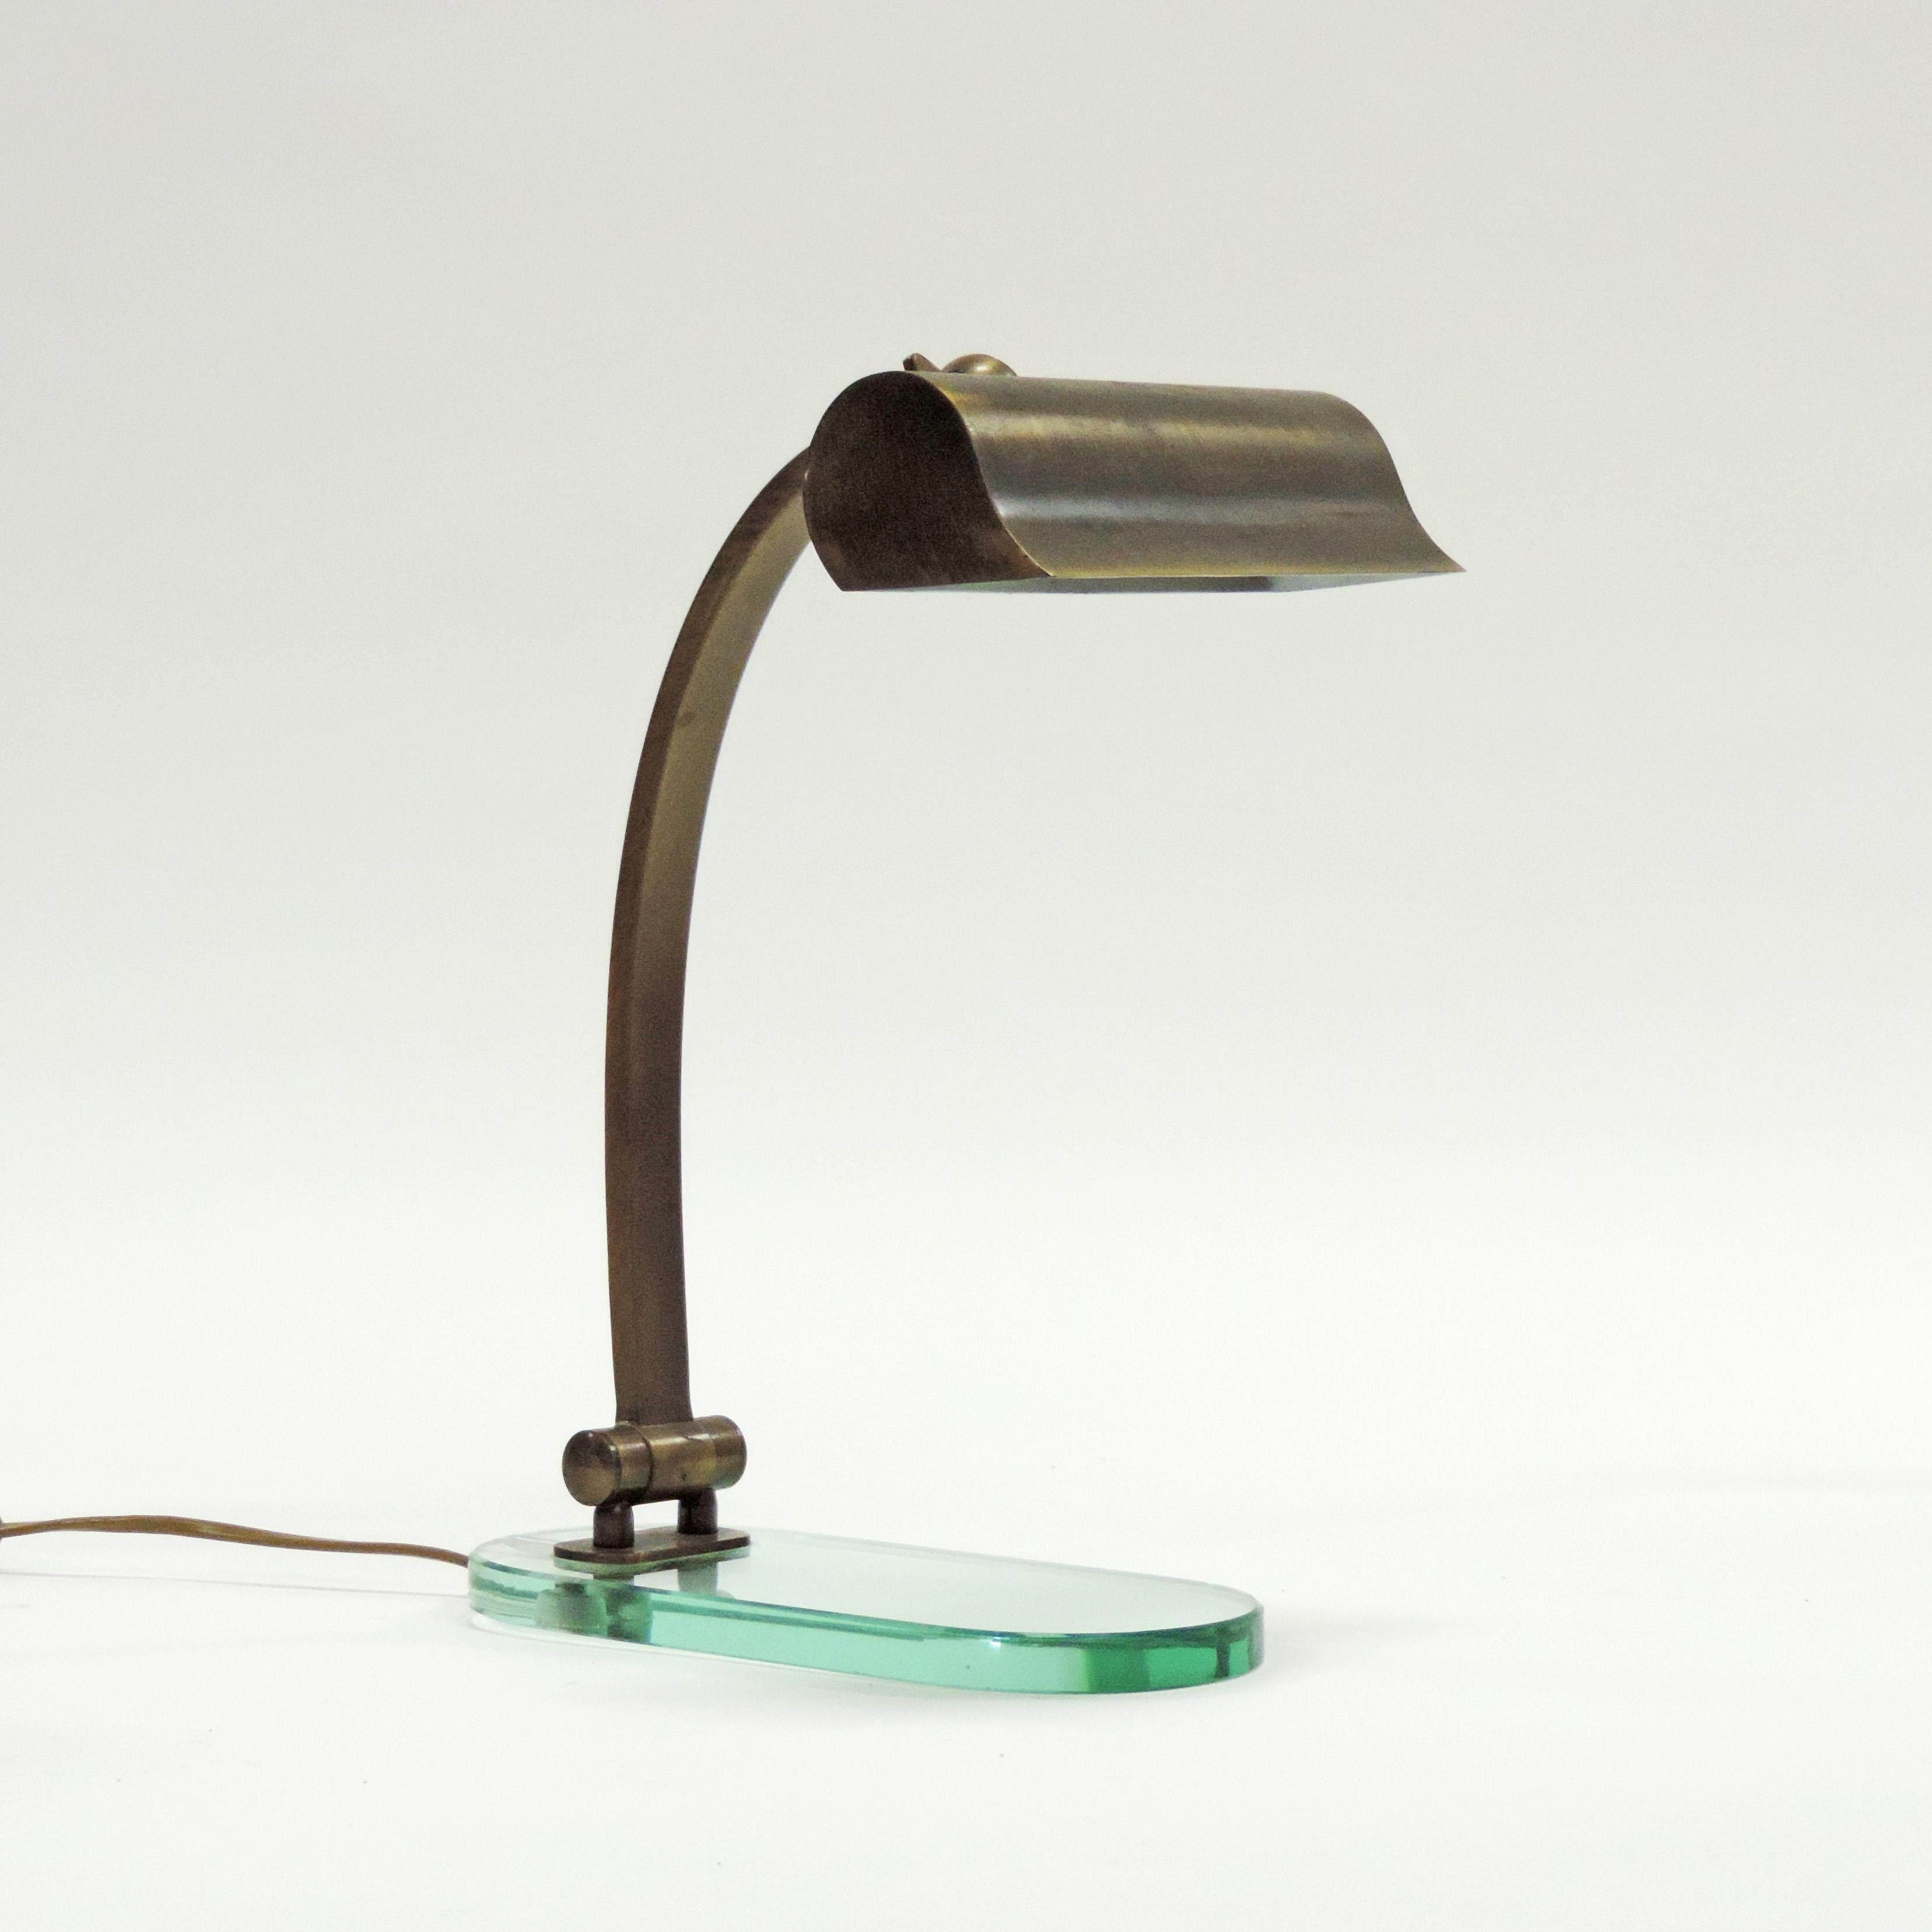 Pair of Italian Adjustable Table Lamps by Lumen in Brass and Glass, Italy, 1950s For Sale 2